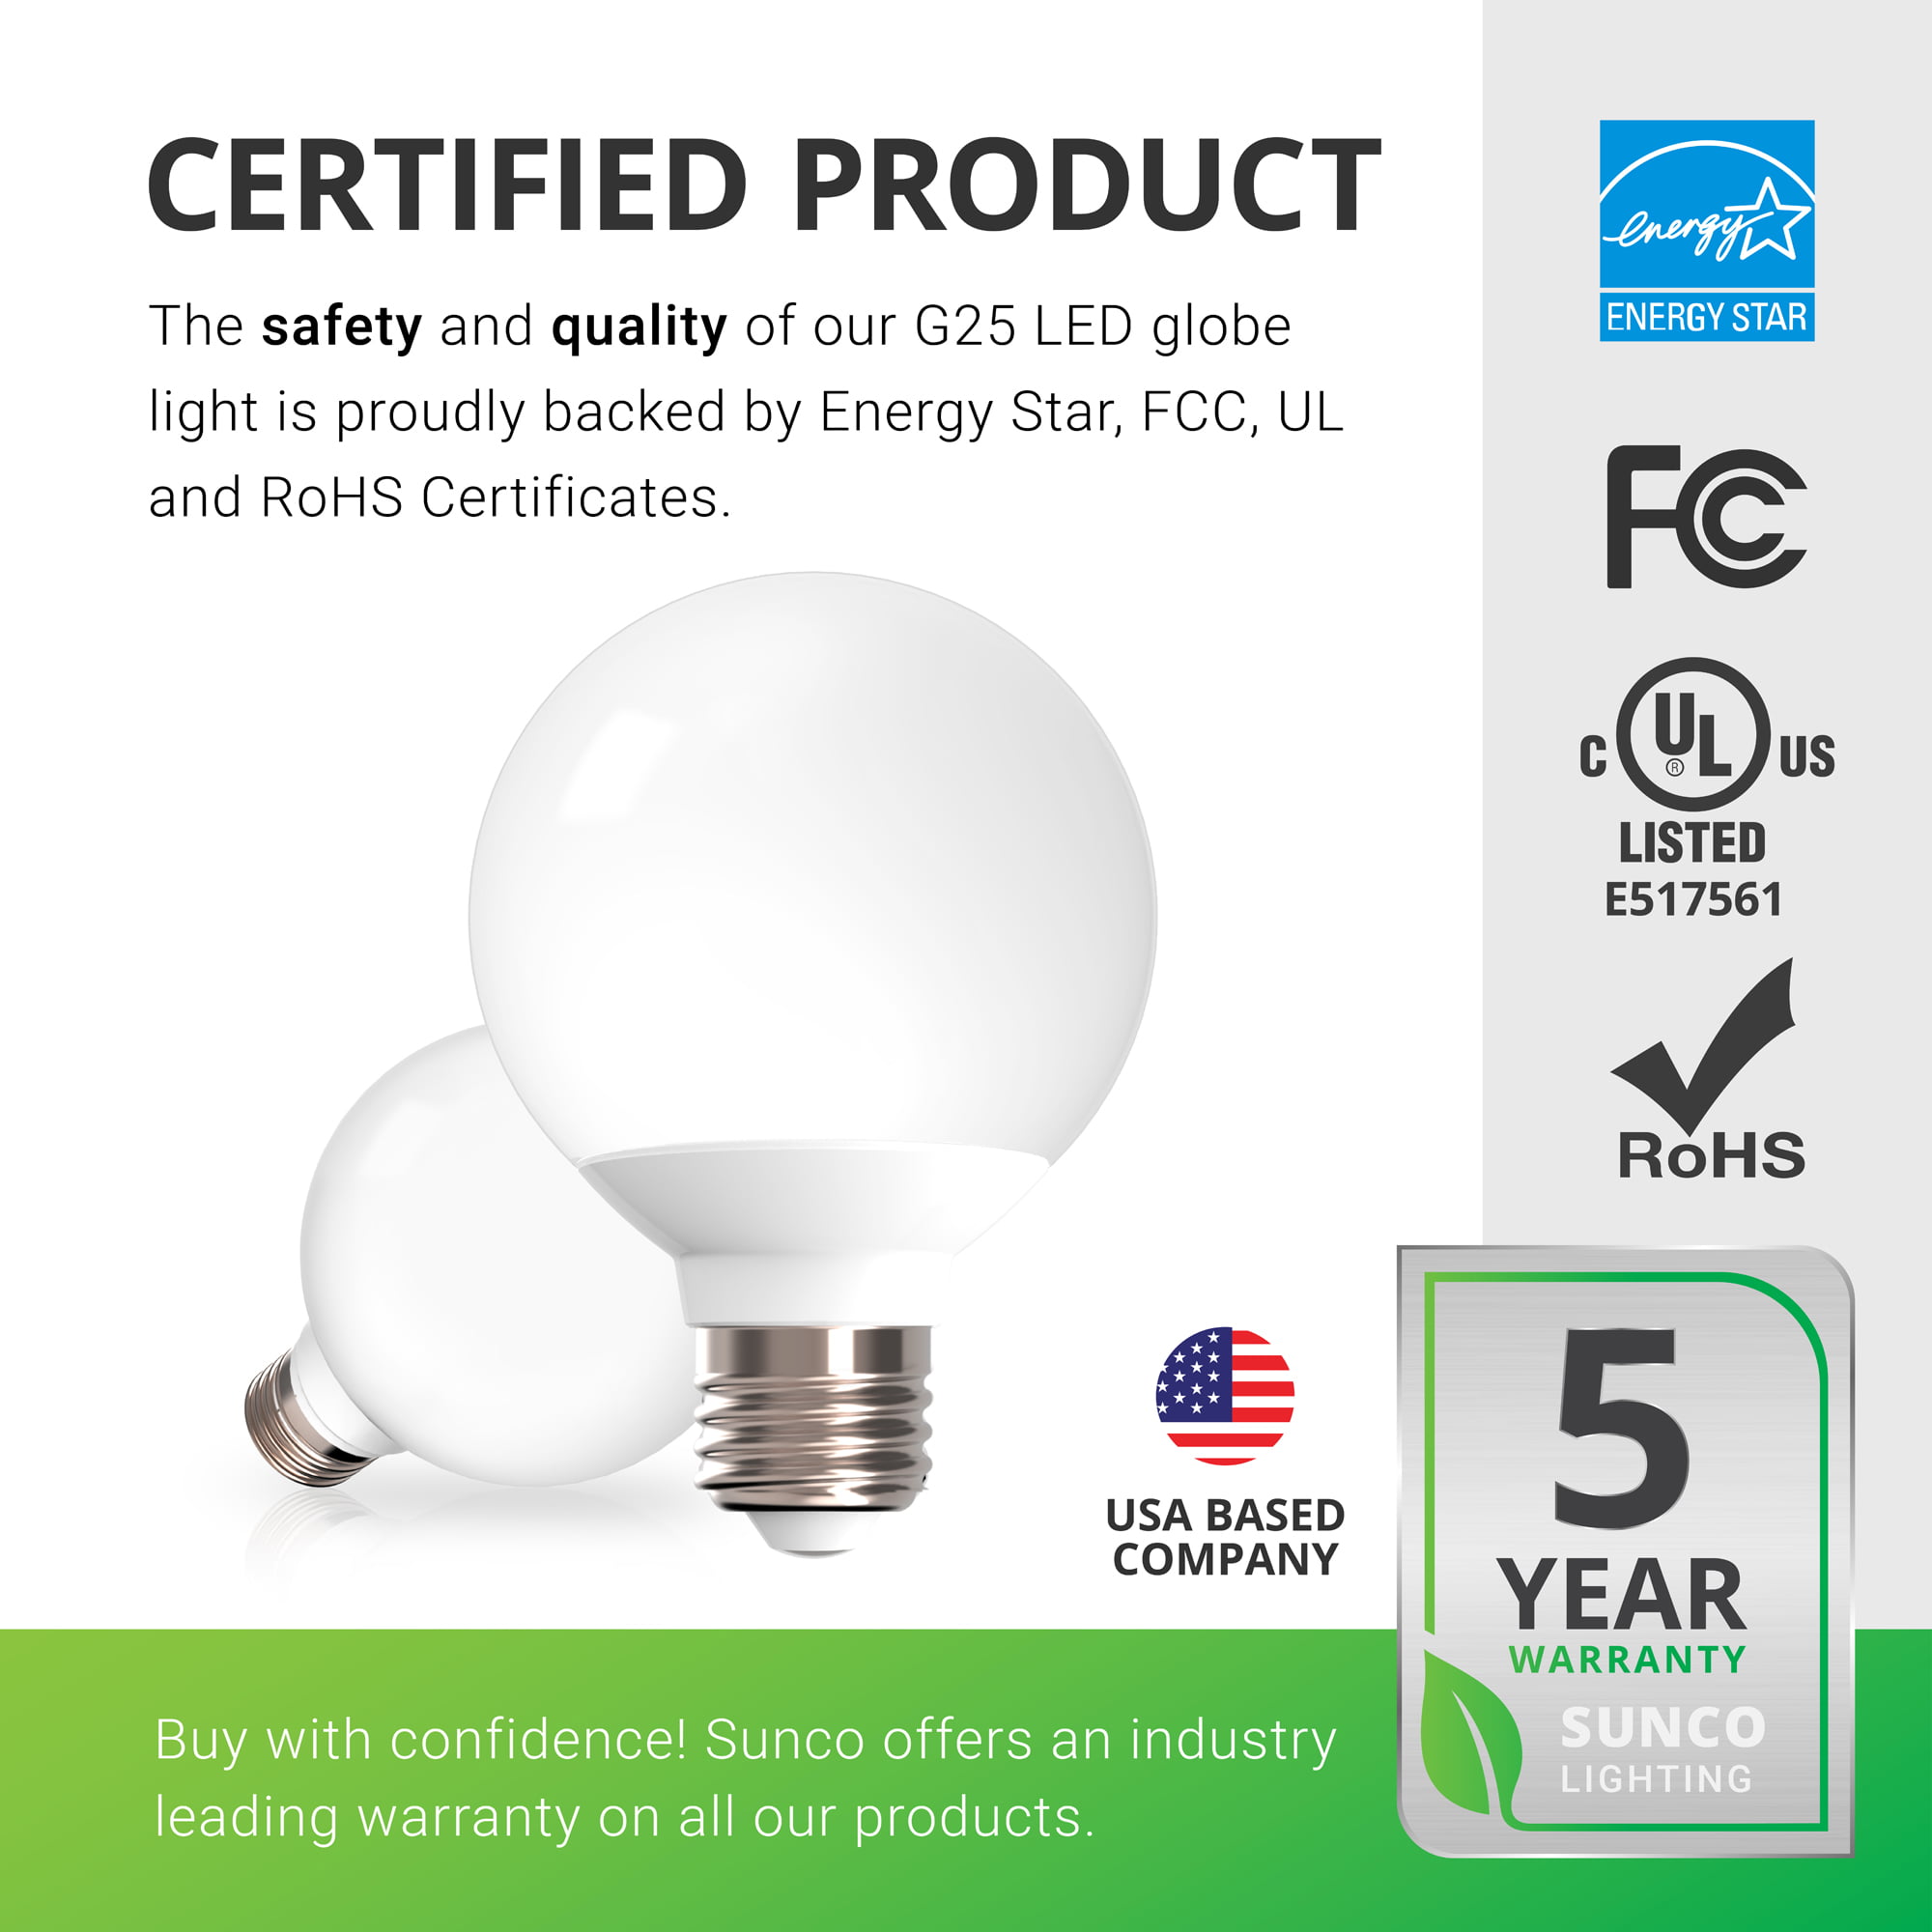 Details about   SUNCO 36 PACK G25 LED LIGHT BULB VANITY 6W 40W 450 LUMEN 5000K DAYLIGHT DIMMABLE 